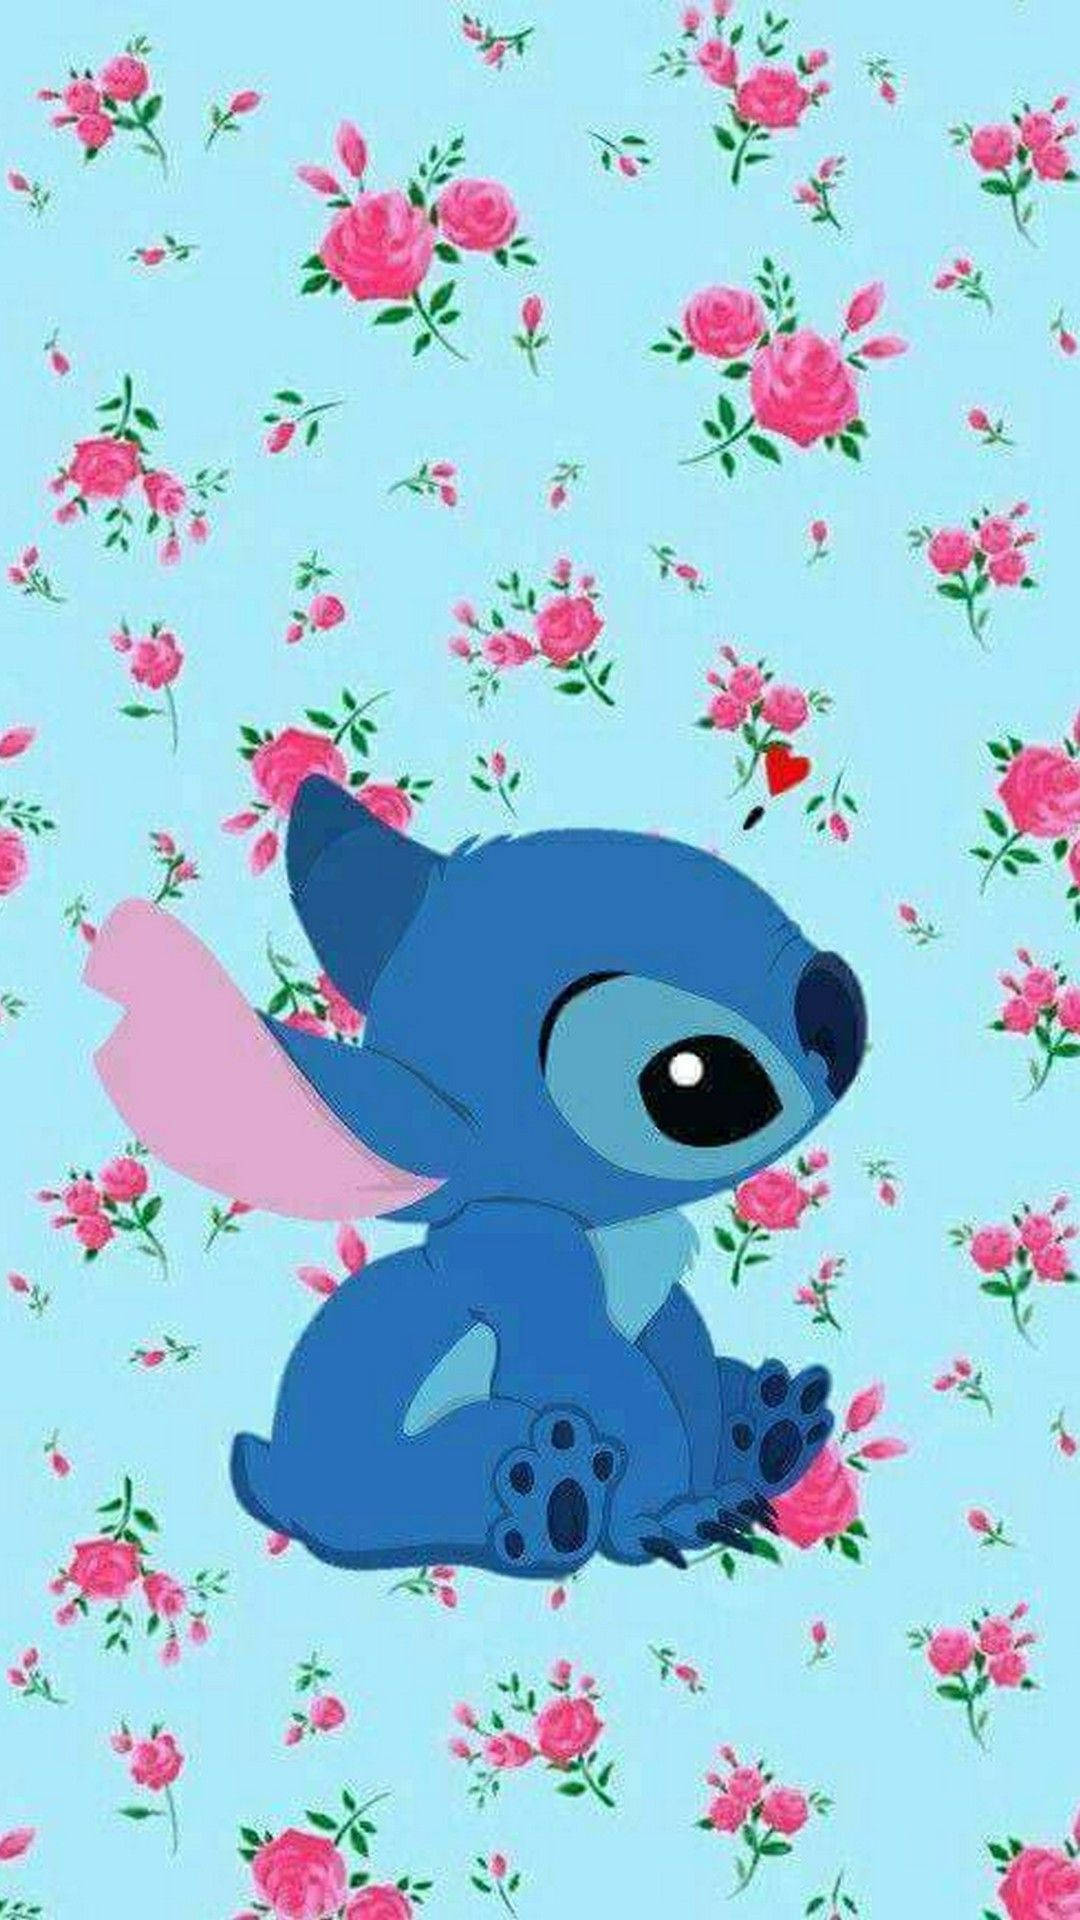 Cute Aesthetic Stitch With Floral Design Background